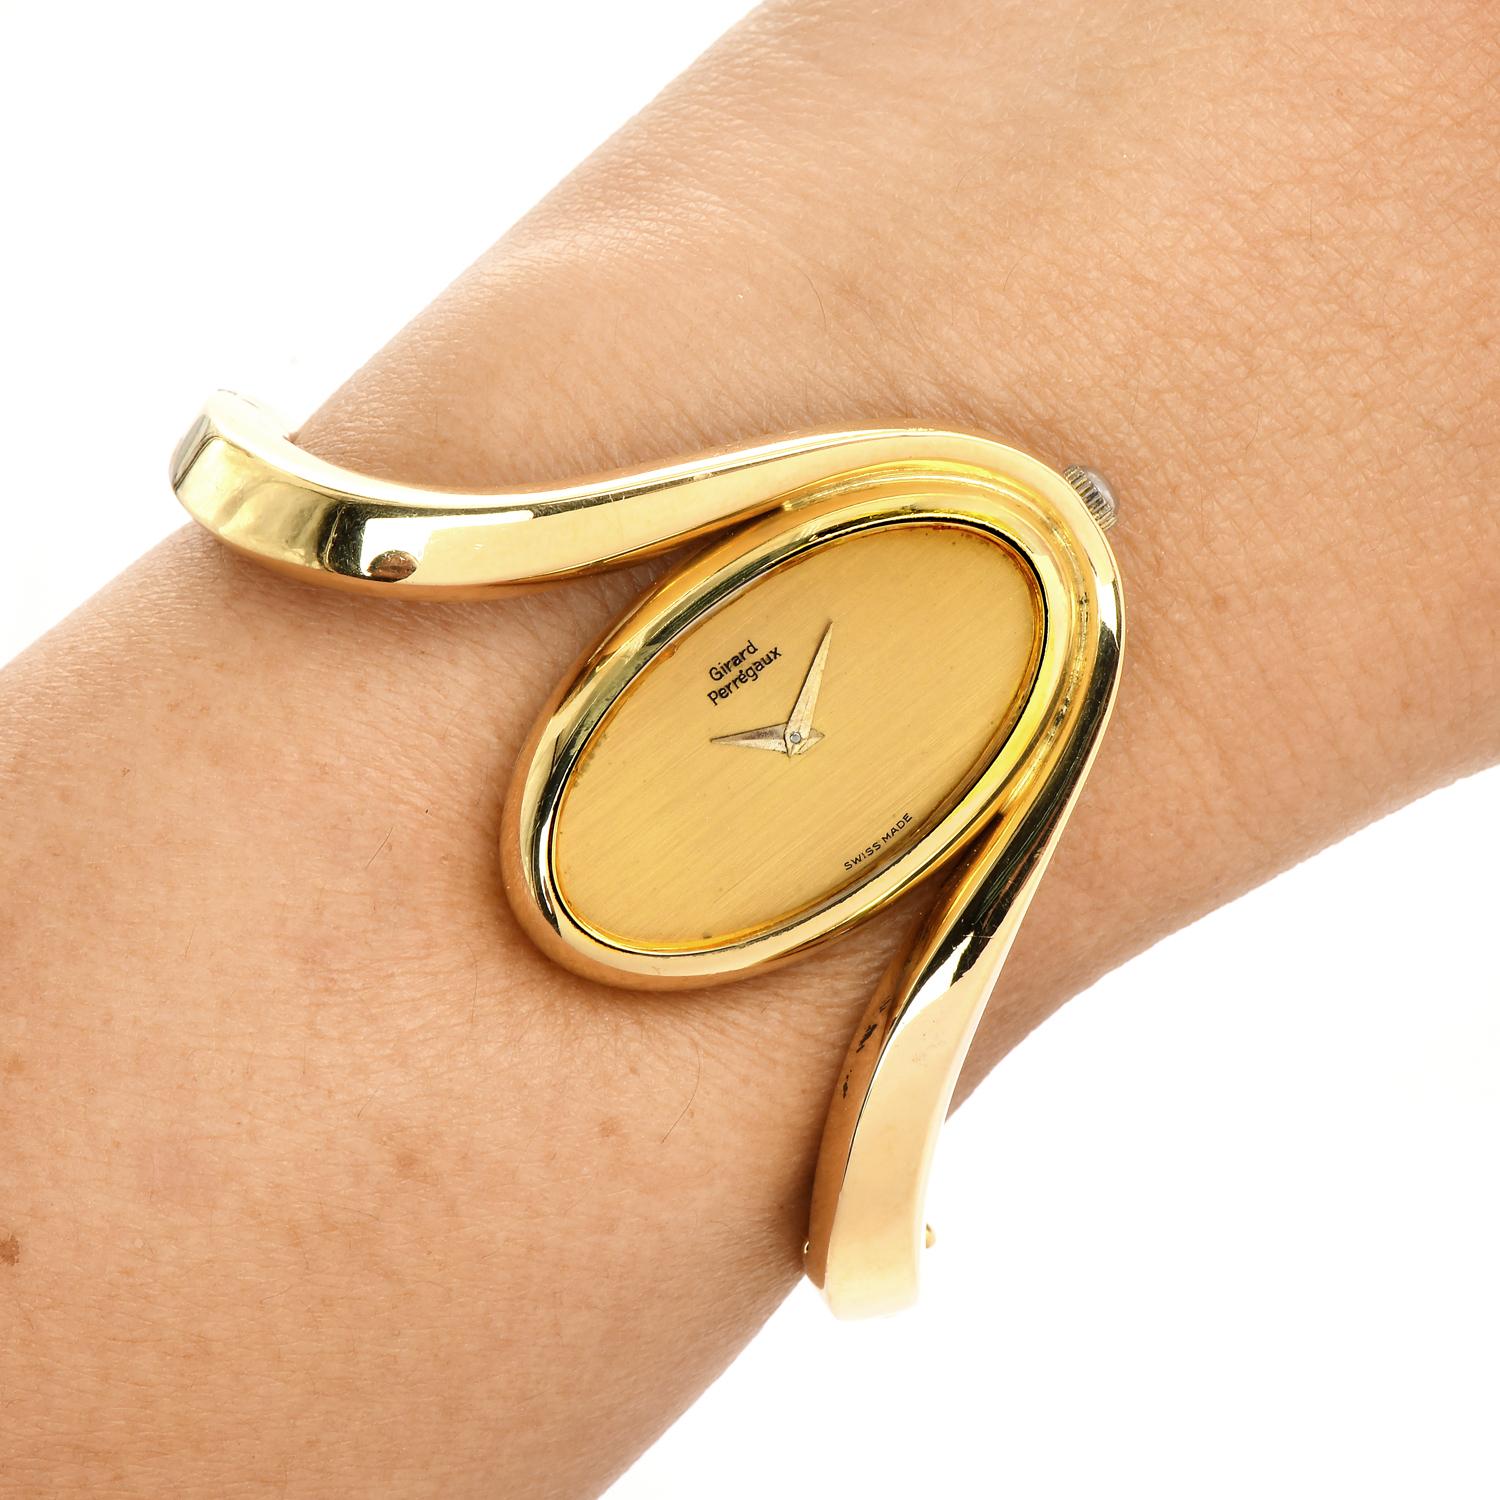 This Vintage 1980s Girard  6  solid gold bangle watch.

This collectible Vintage piece is crafted in highly polished 18K Yellow Gold, weighing 77.0 grams and measuring: 6” around the wrist.

An inversed oval, wave bangle watch, with a unique and